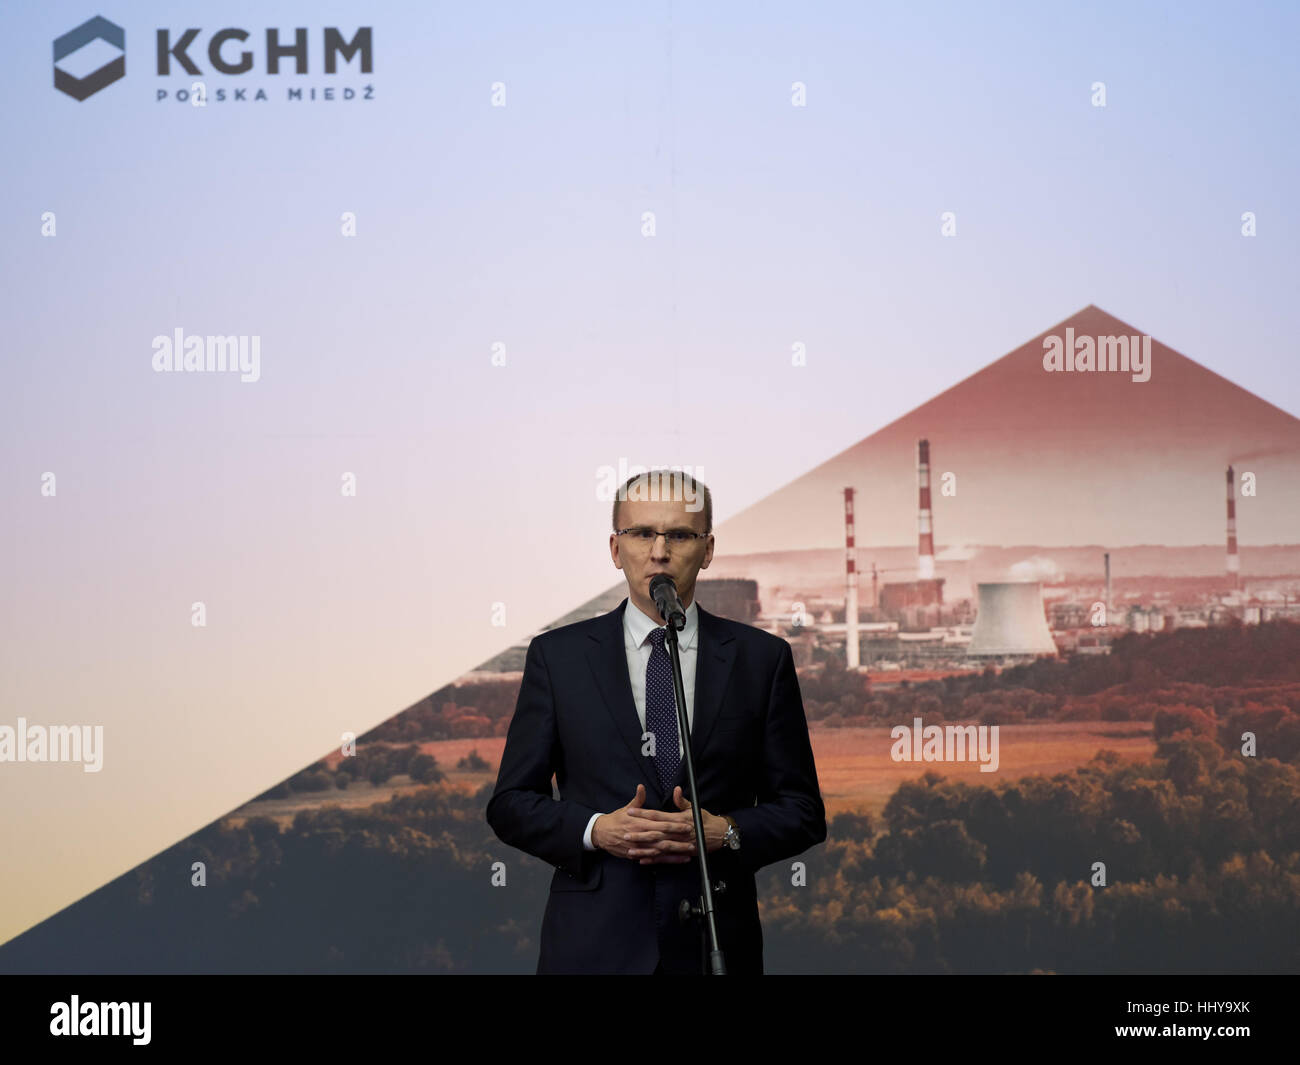 GLOGOW, POLAND - JANUARY 20, 2017:  Chairman of KGHM Polska Miedz Radoslaw Domagalski-Labedzki during the official opening of the new production line Stock Photo